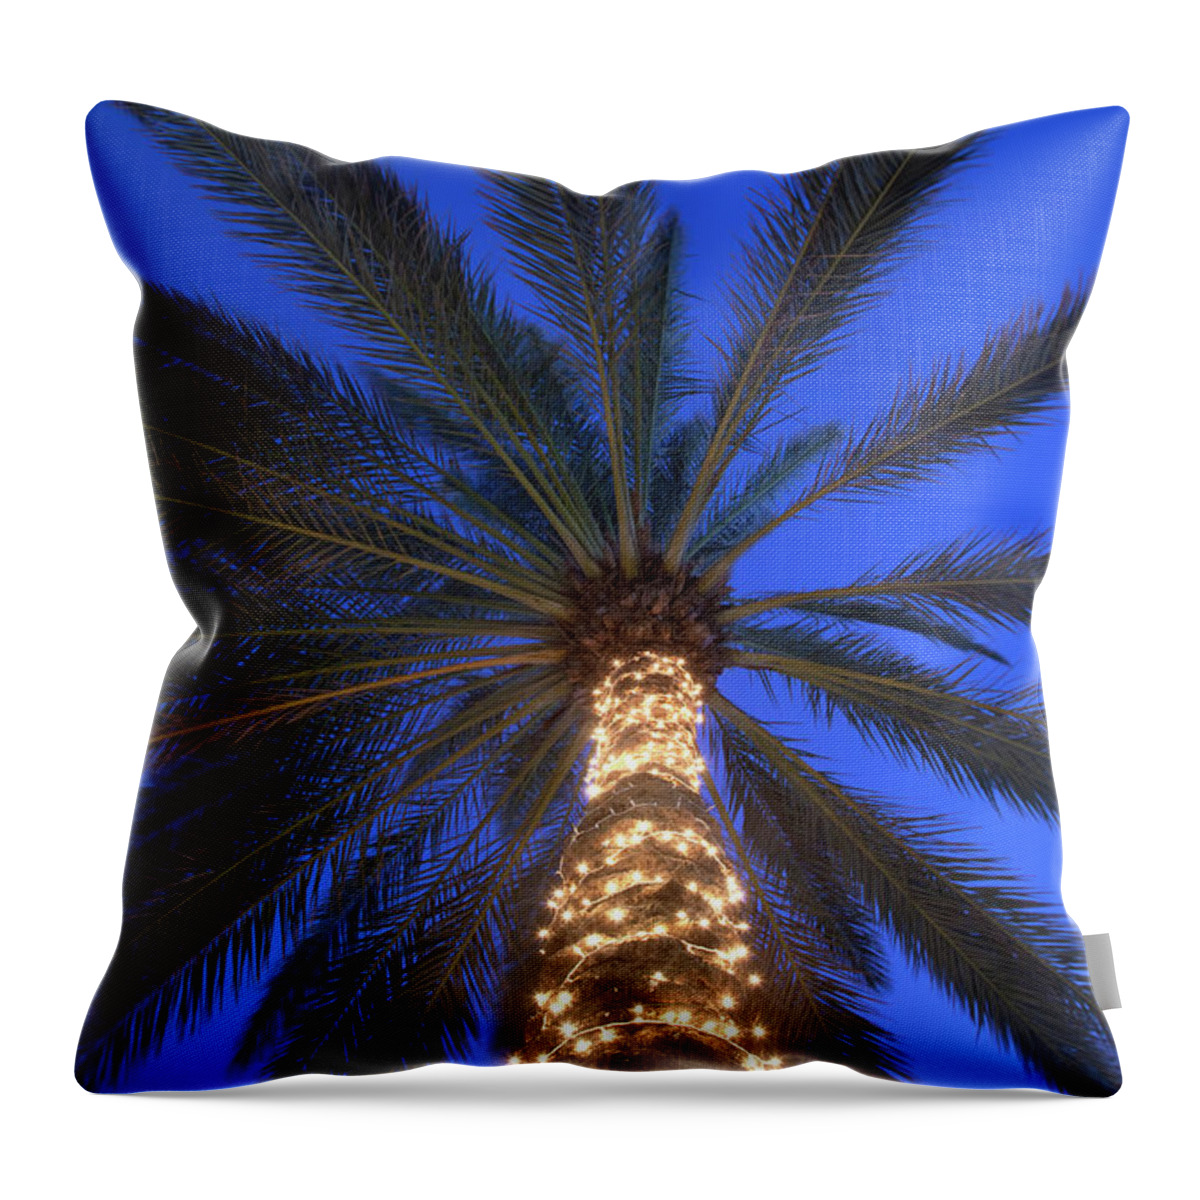 Tranquility Throw Pillow featuring the photograph Moonrise Near Lit-up Palm Tree by Grant Faint